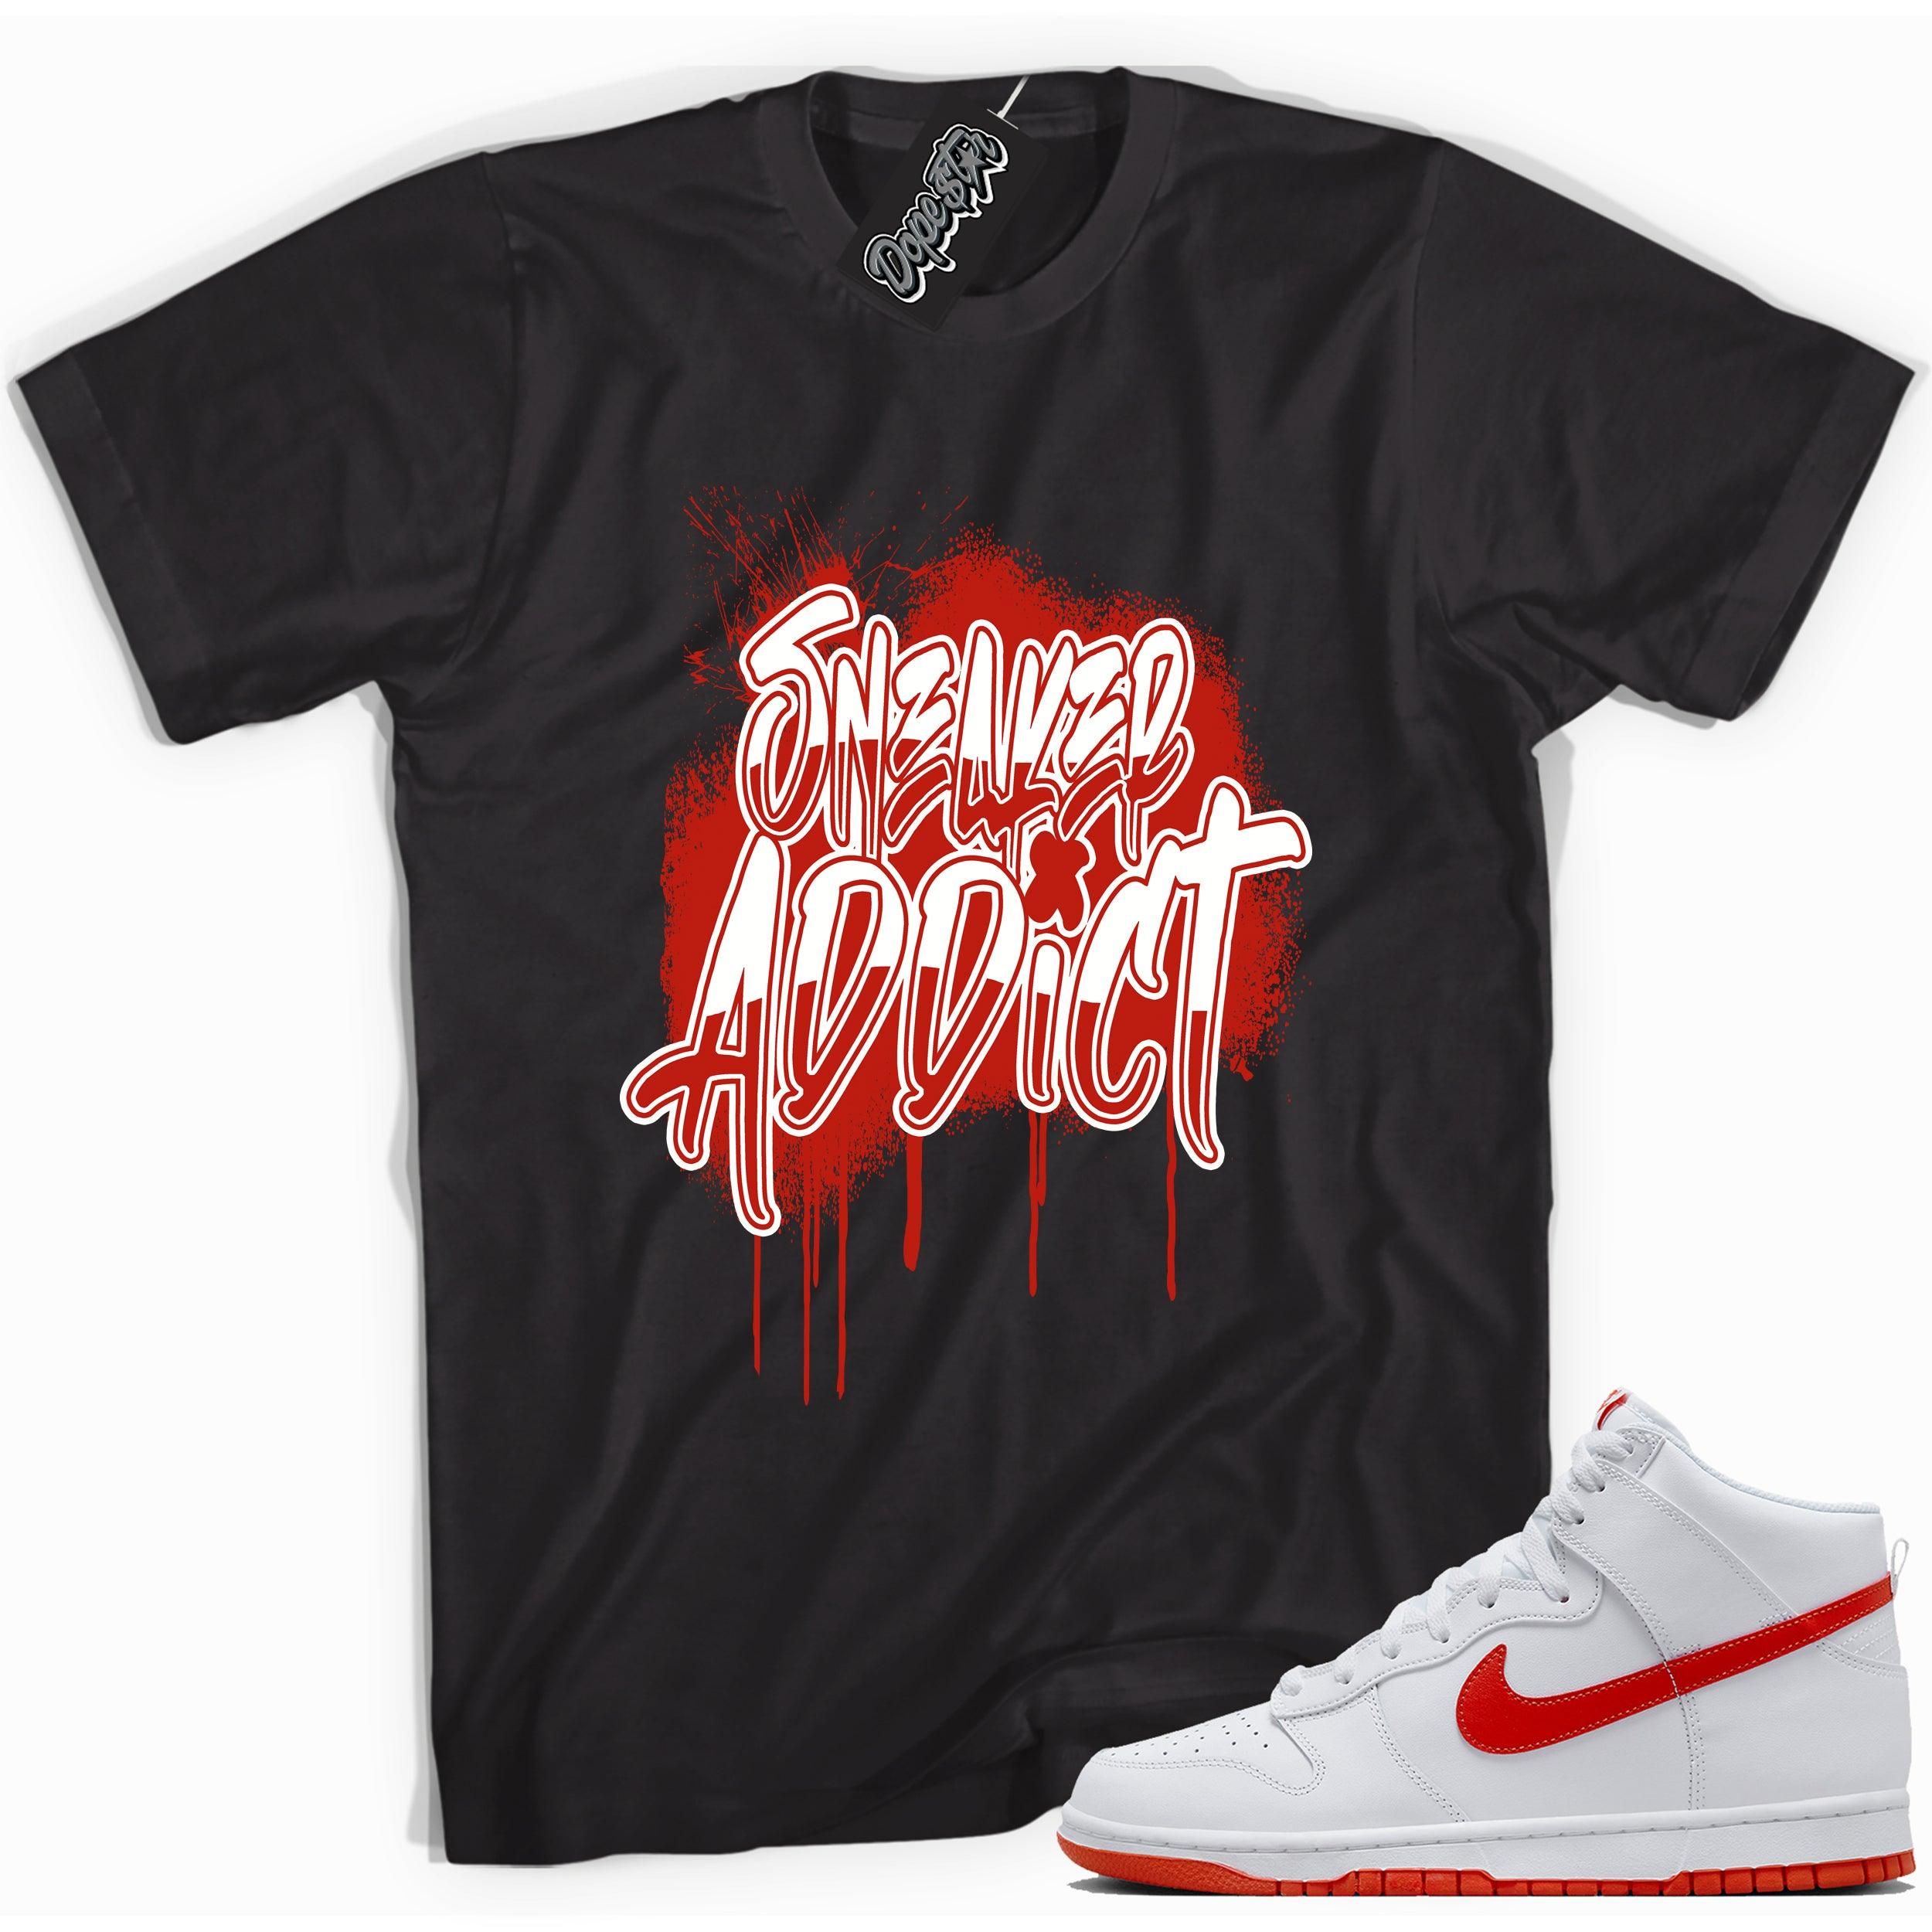 Cool black graphic tee with 'sneaker addict' print, that perfectly matches Nike Dunk High White Picante Red sneakers.